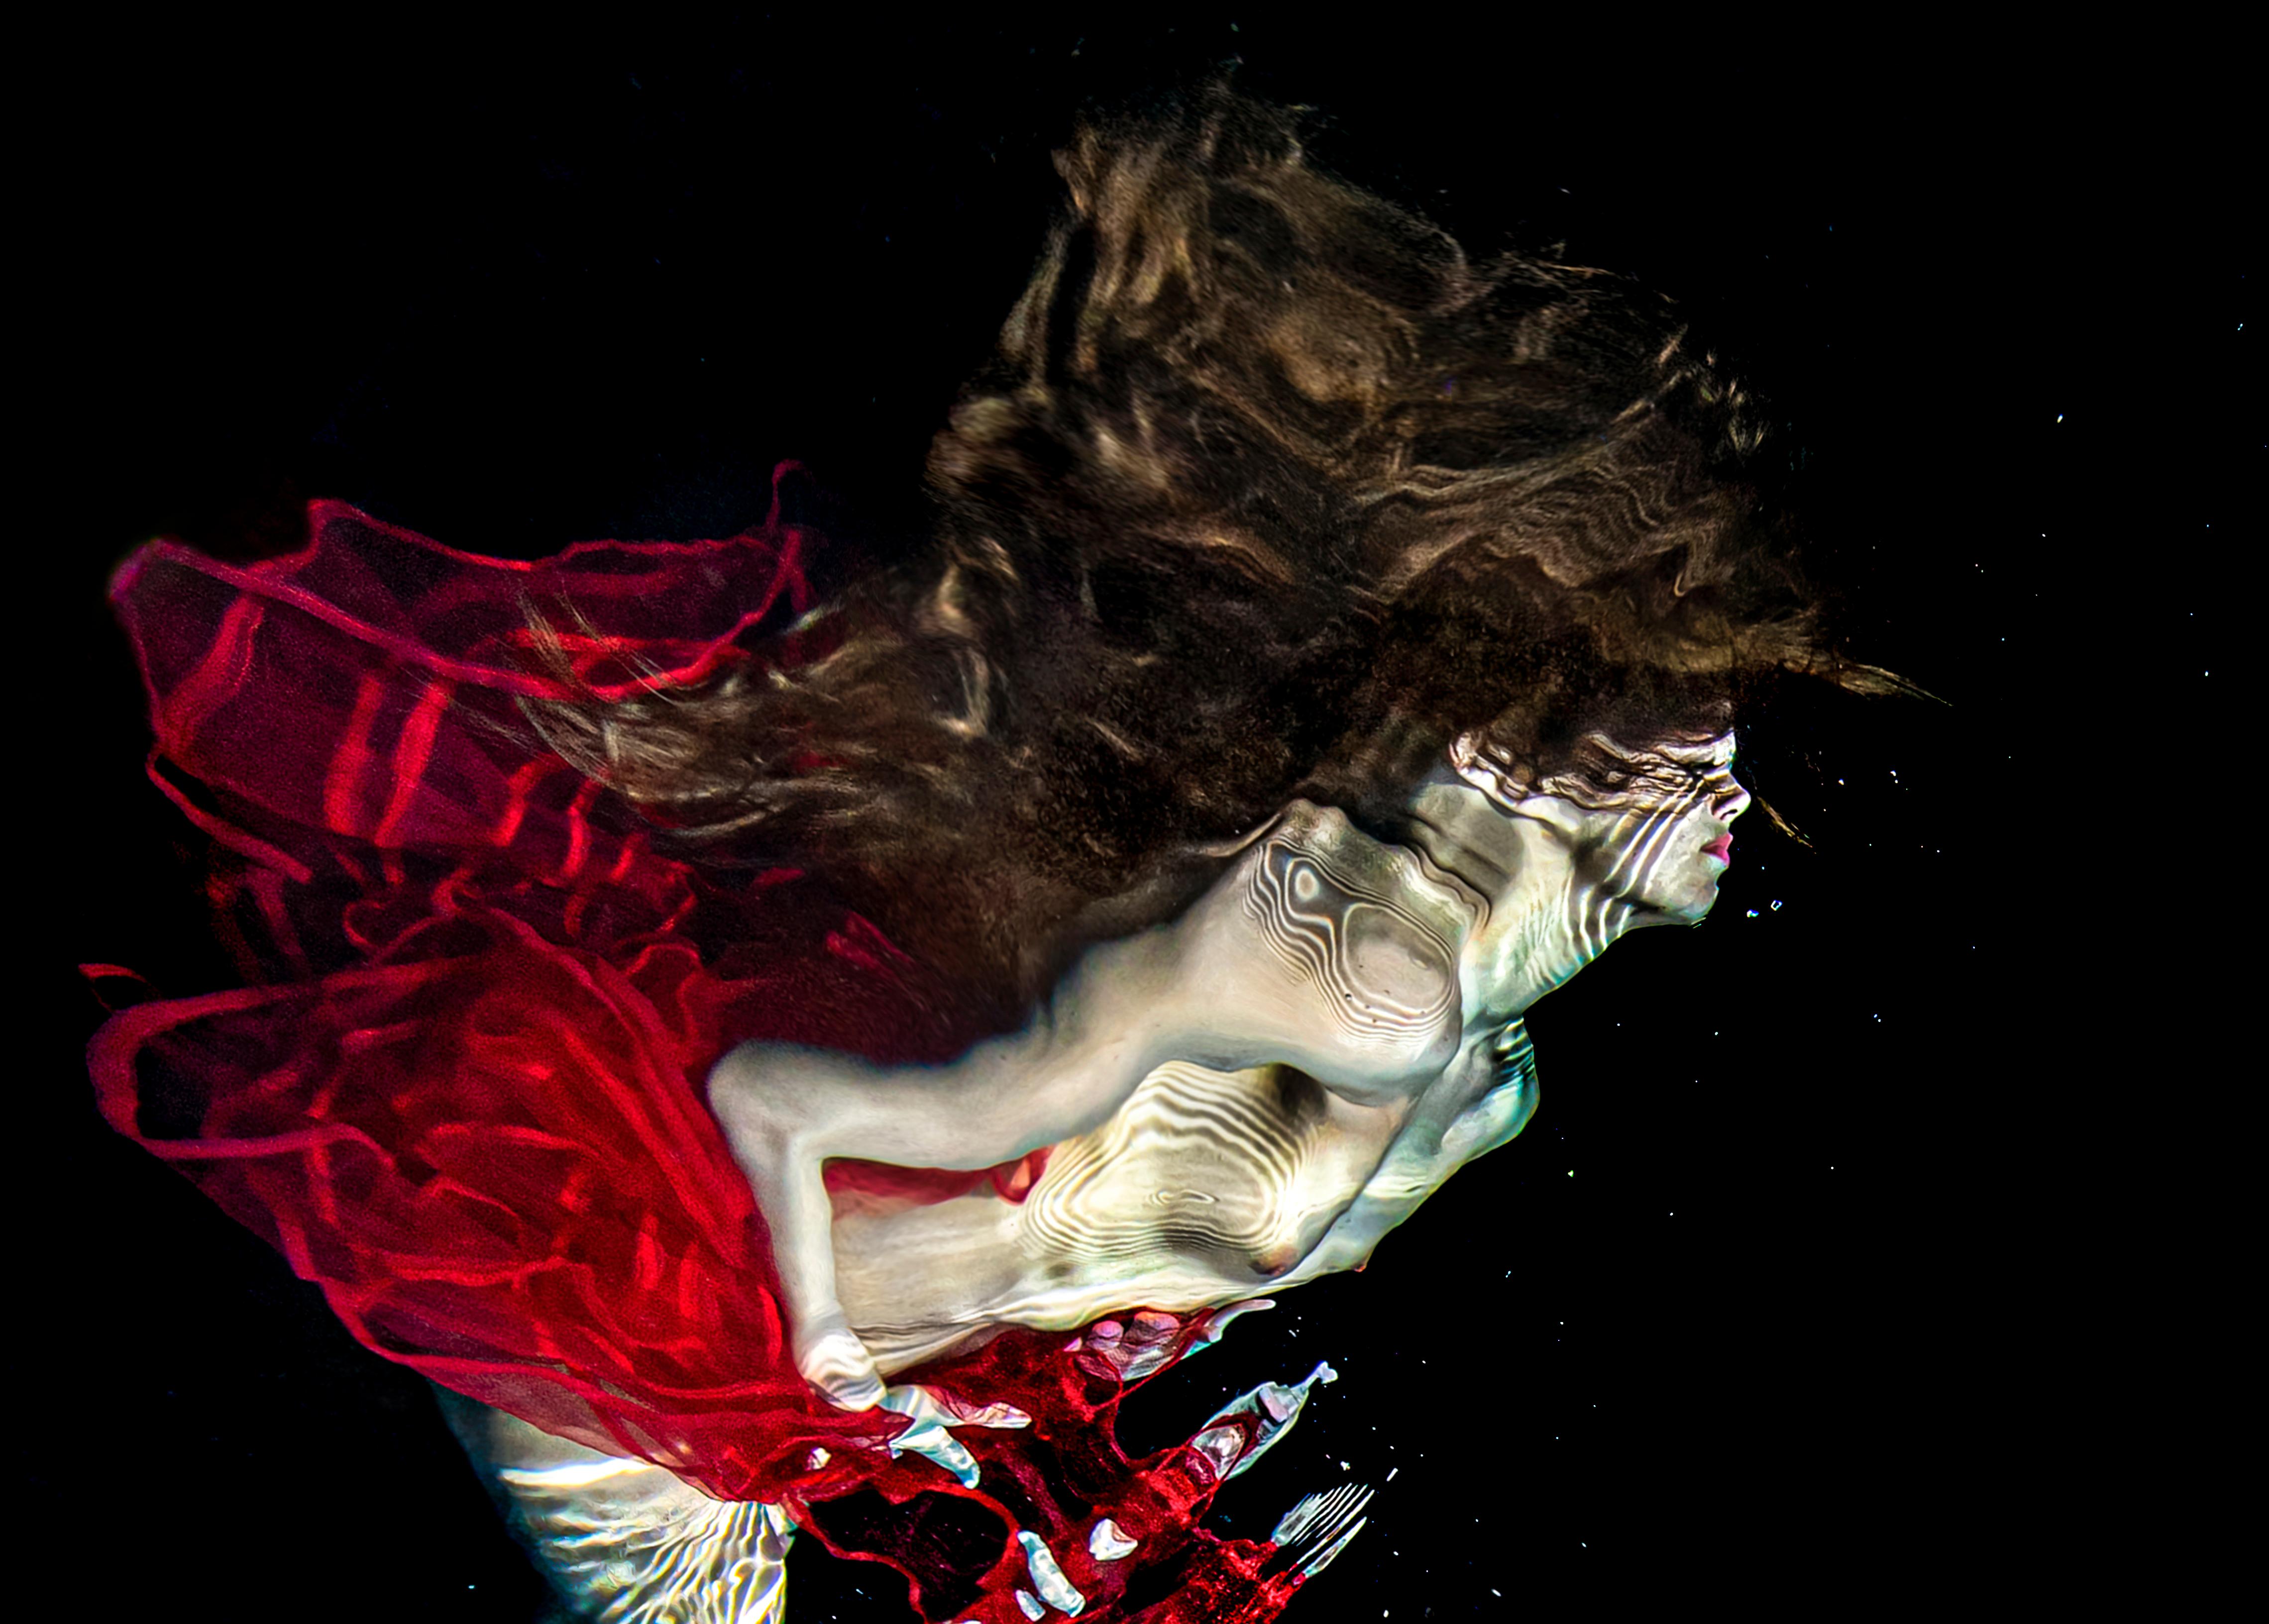 Salsa - underwater nude photograph - series REFLECTIONS - archival pigment 43x64 - Photograph by Alex Sher